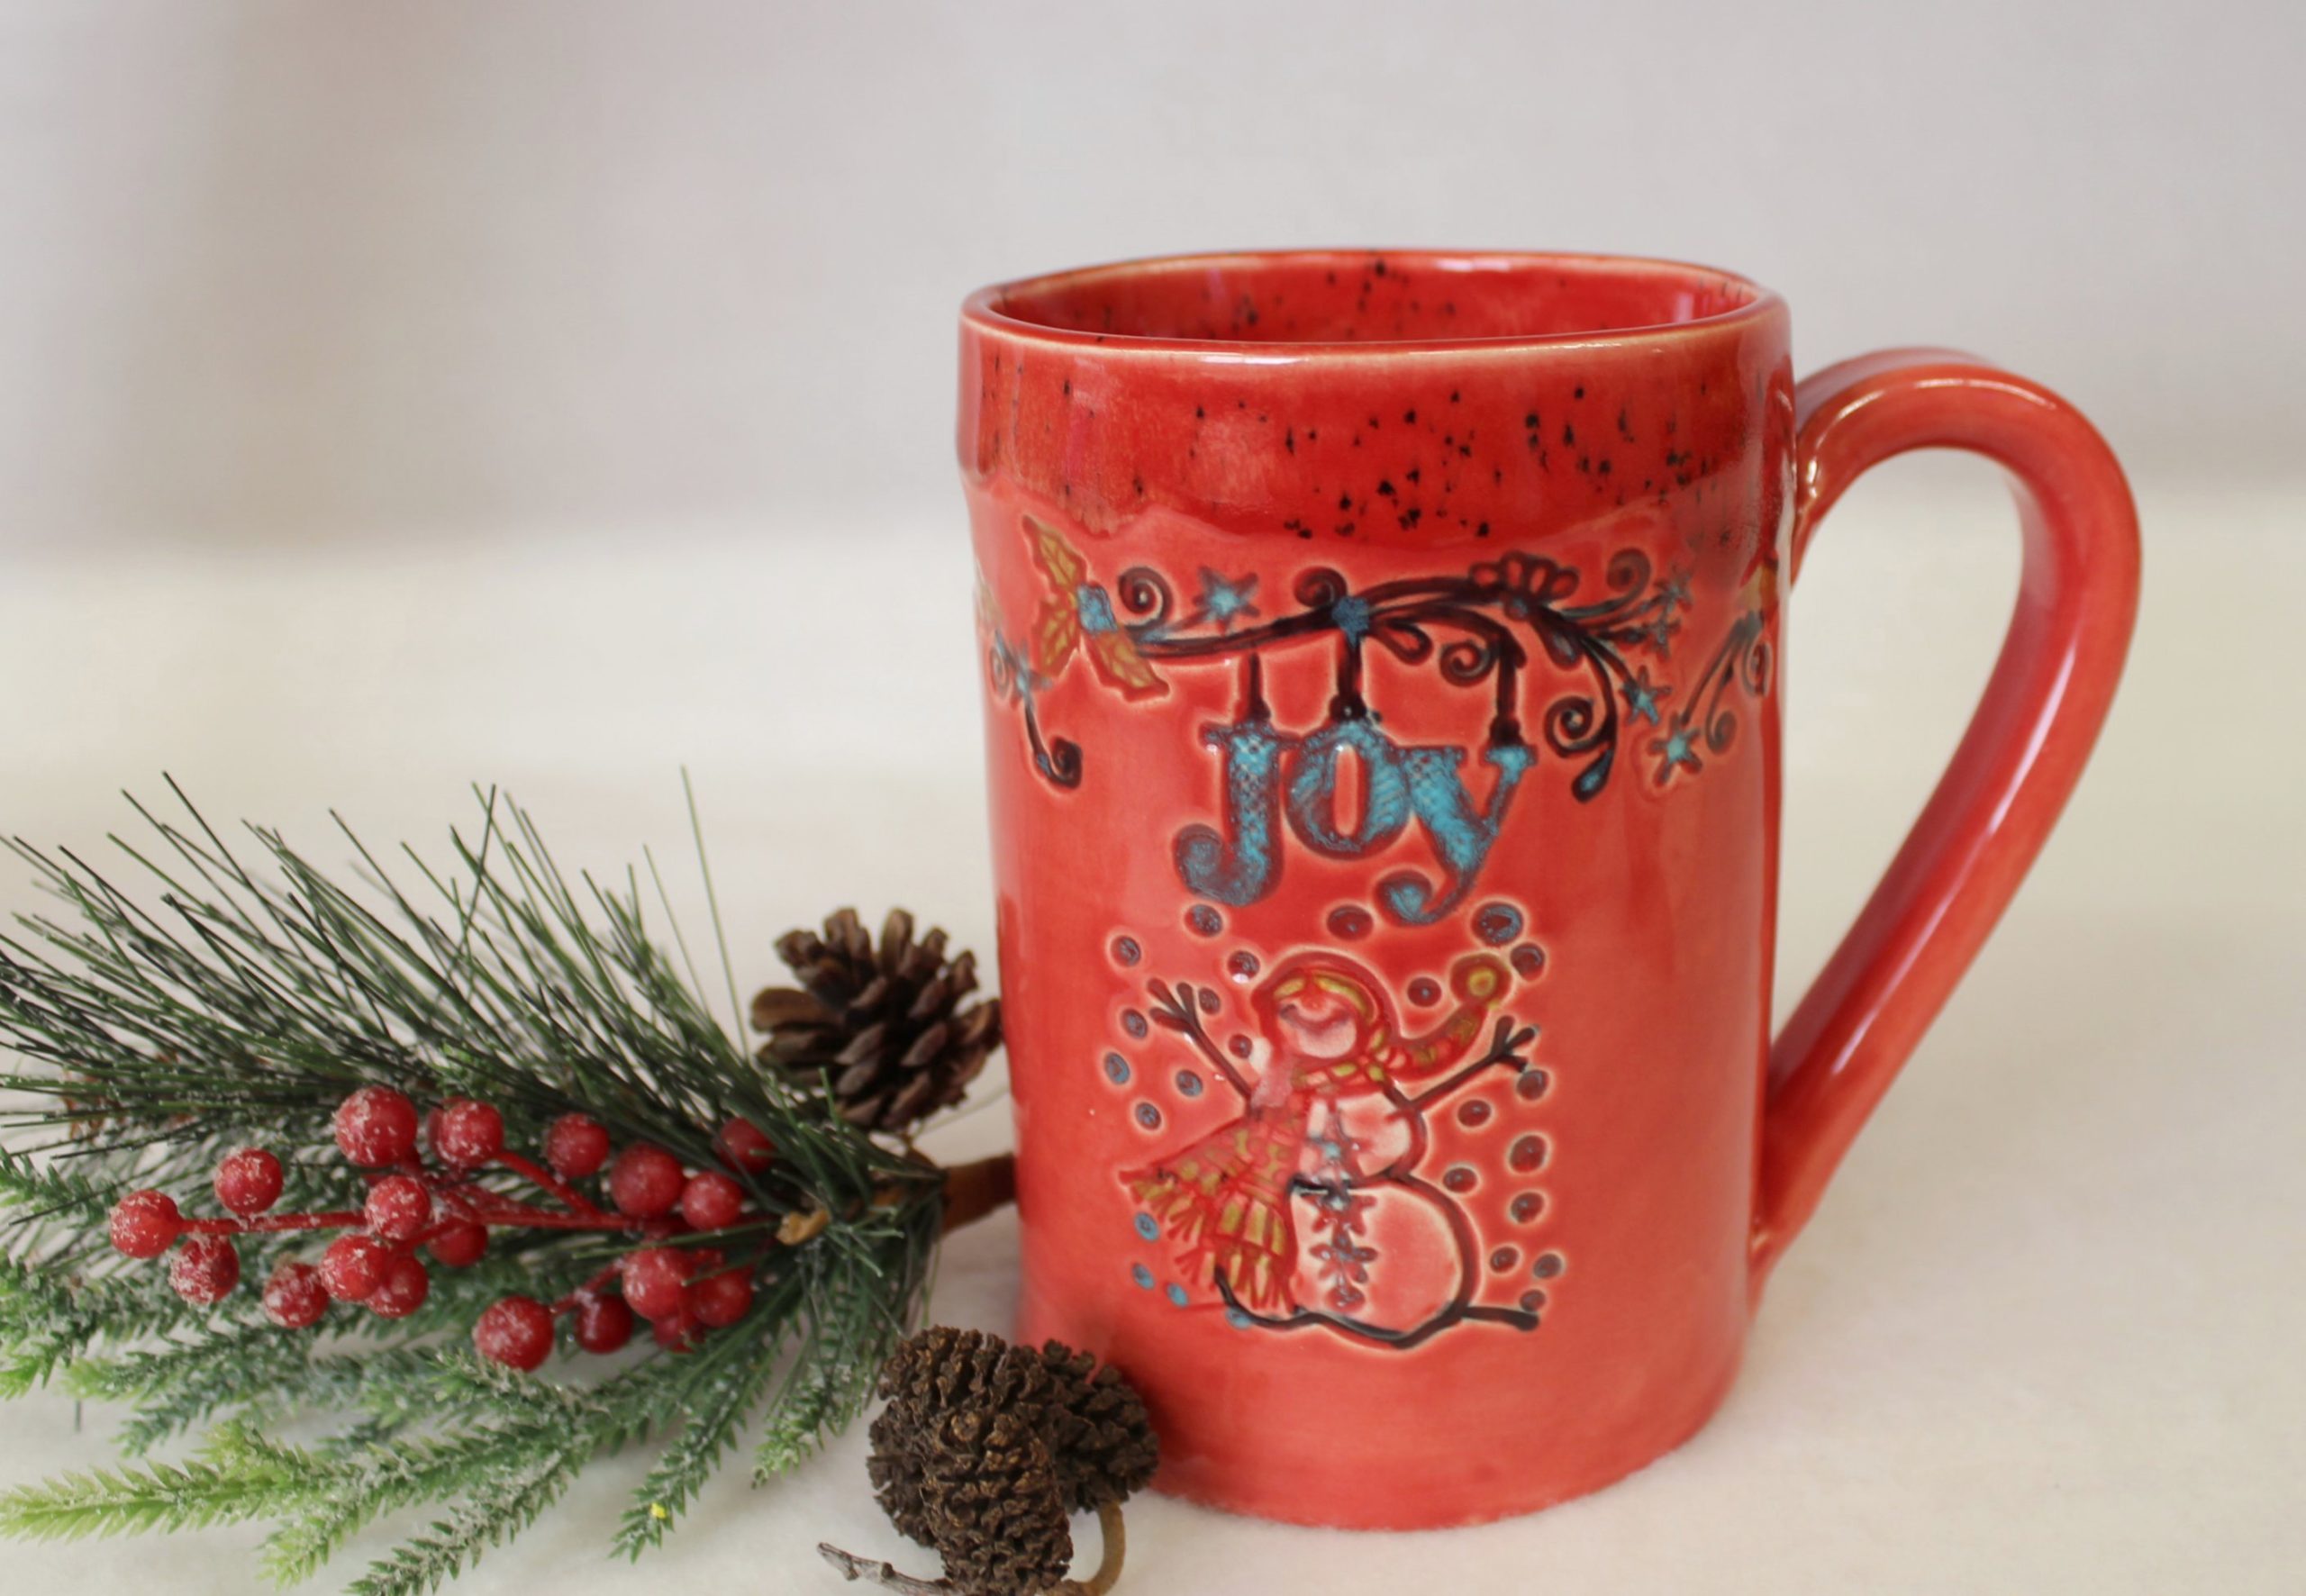 Cookie canister- Winterjoy collection